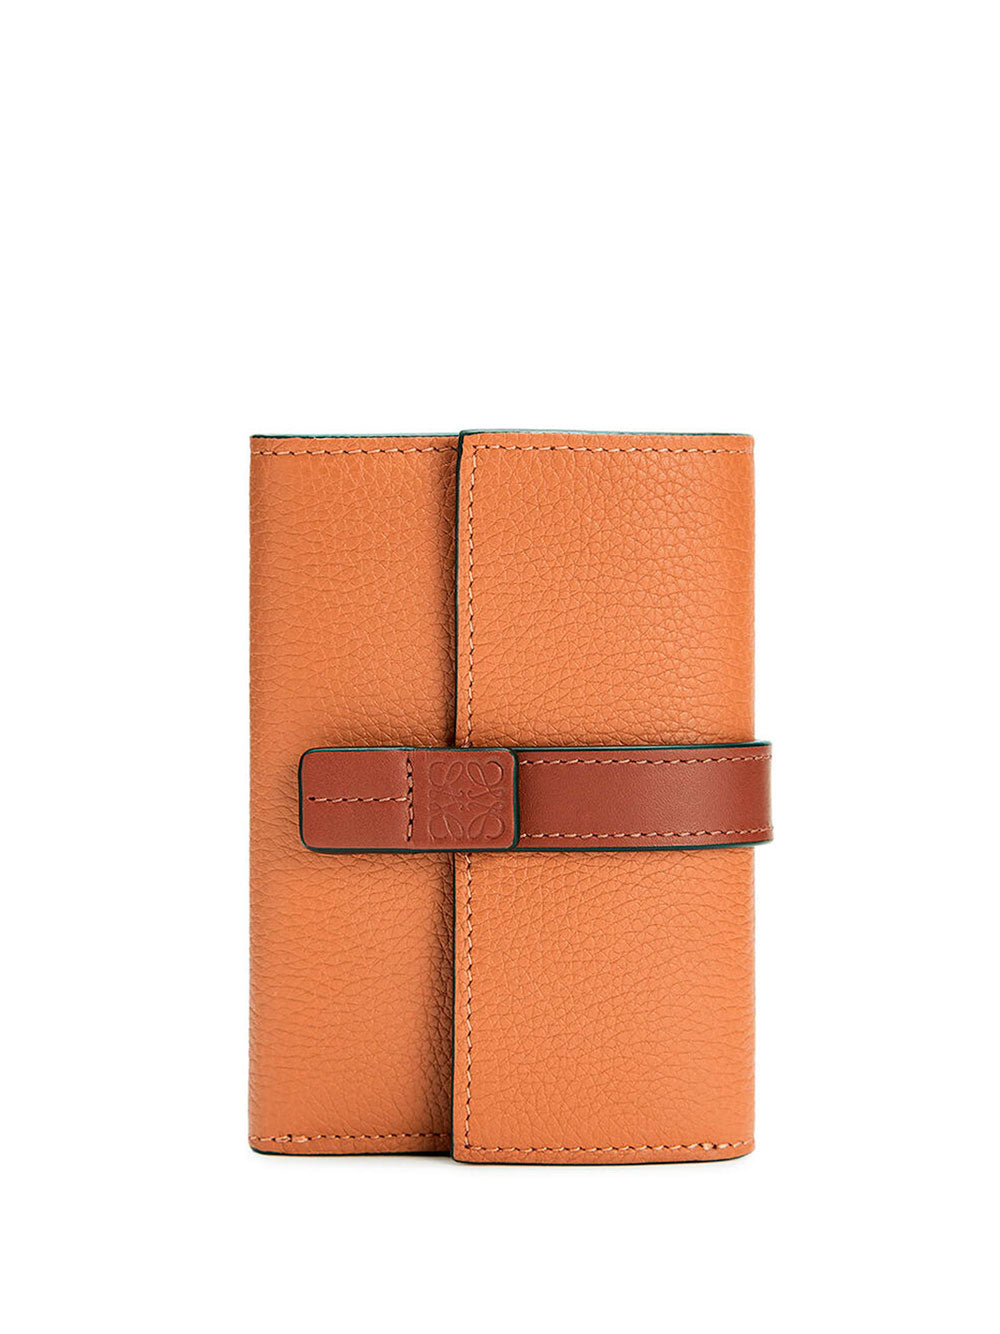 Small vertical wallet in soft grained calfskin